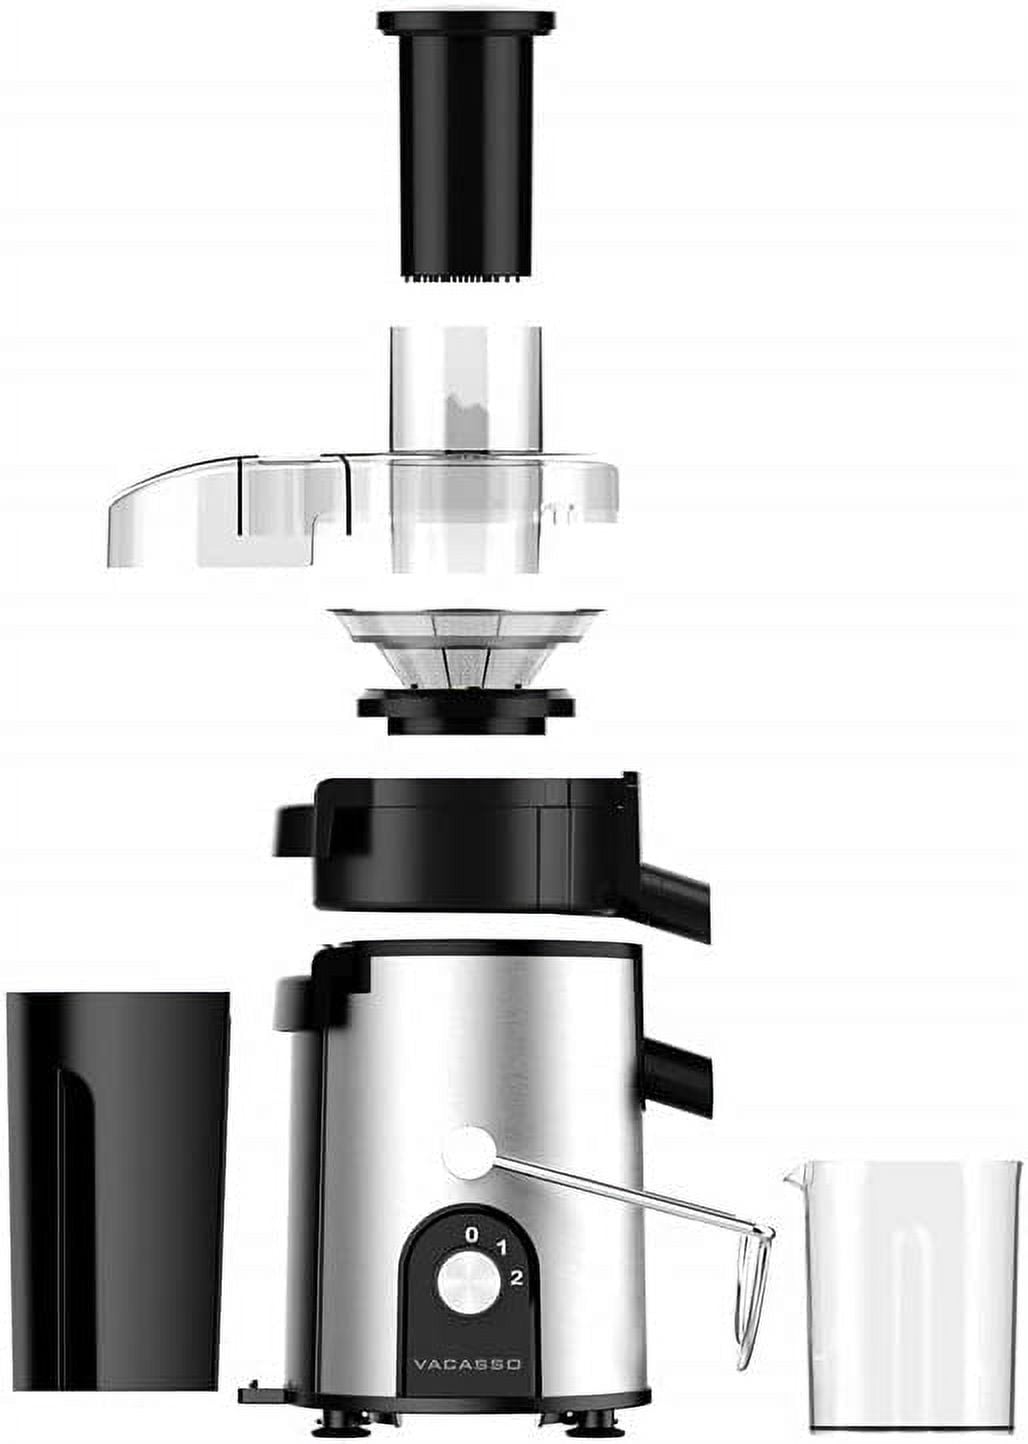 Juicer Machines, Vxdoirk 3 Wide Mouth 400W Centrifugal Juicers for  Vegetable and Fruit, Juice Extractor with 3-Speed Setting, Easy to Clean,  BPA Free